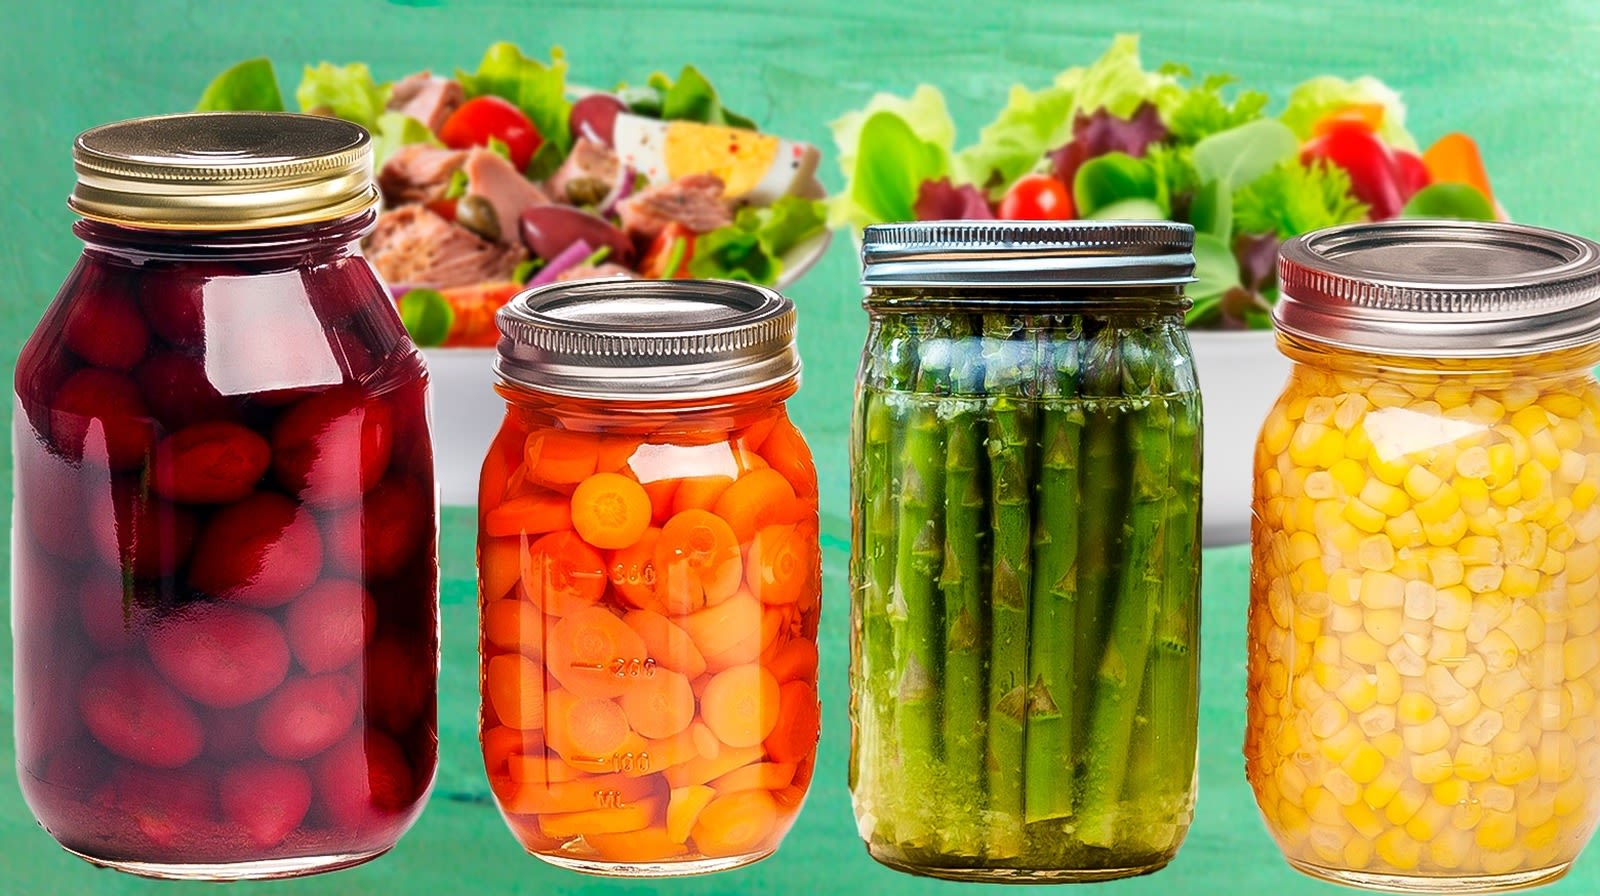 12 Best Canned Veggies To Add To Your Next Salad